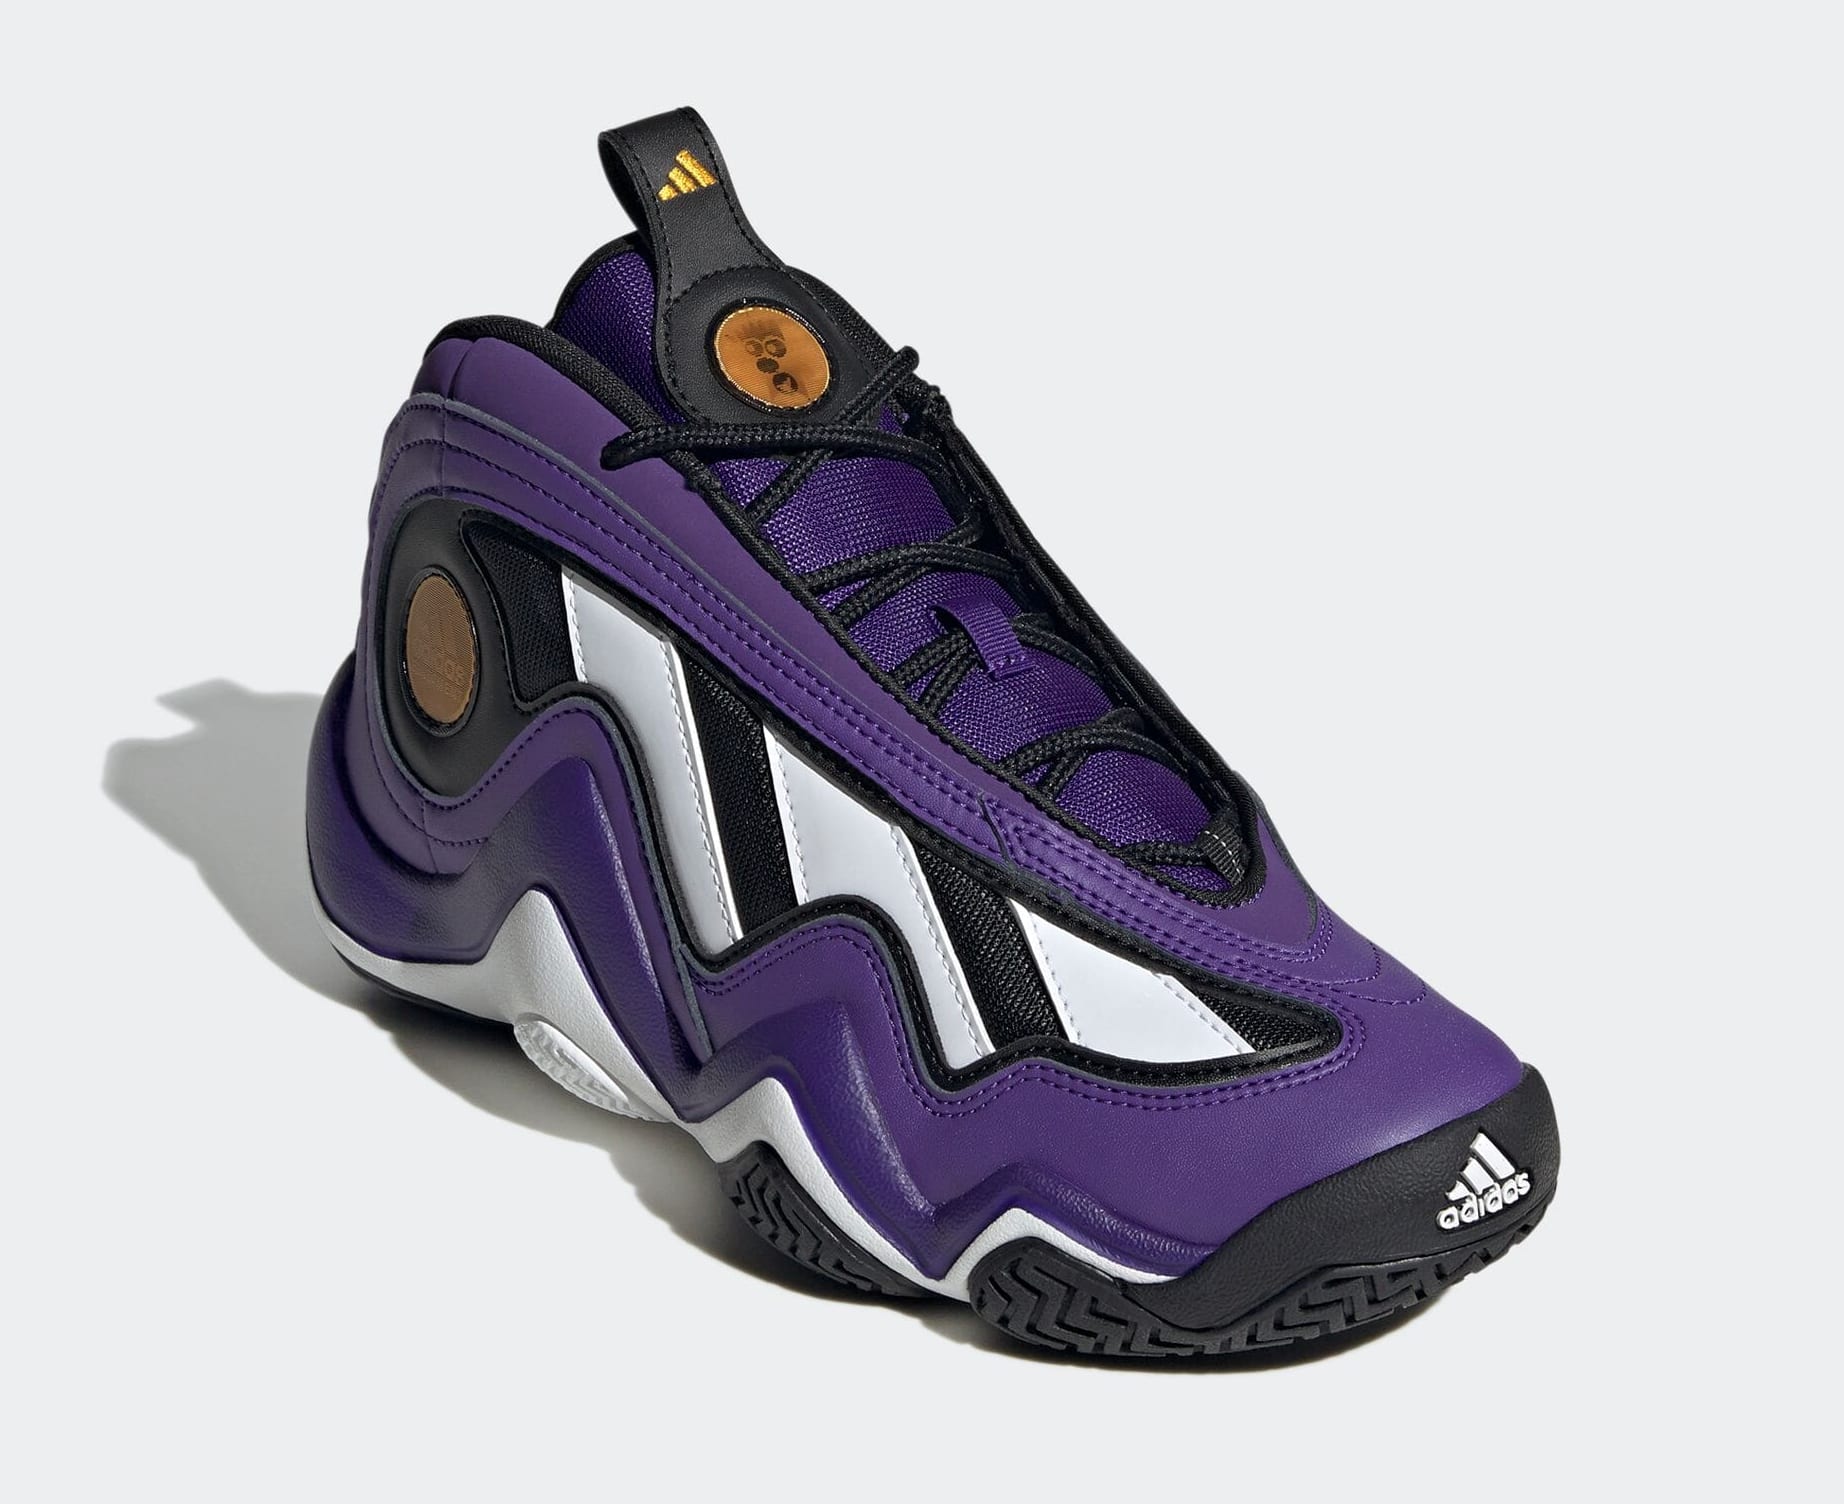 boy Acquisition Bone Kobe Bryant Adidas Crazy 97 EQT Release Date GY4520 | Sole Collector